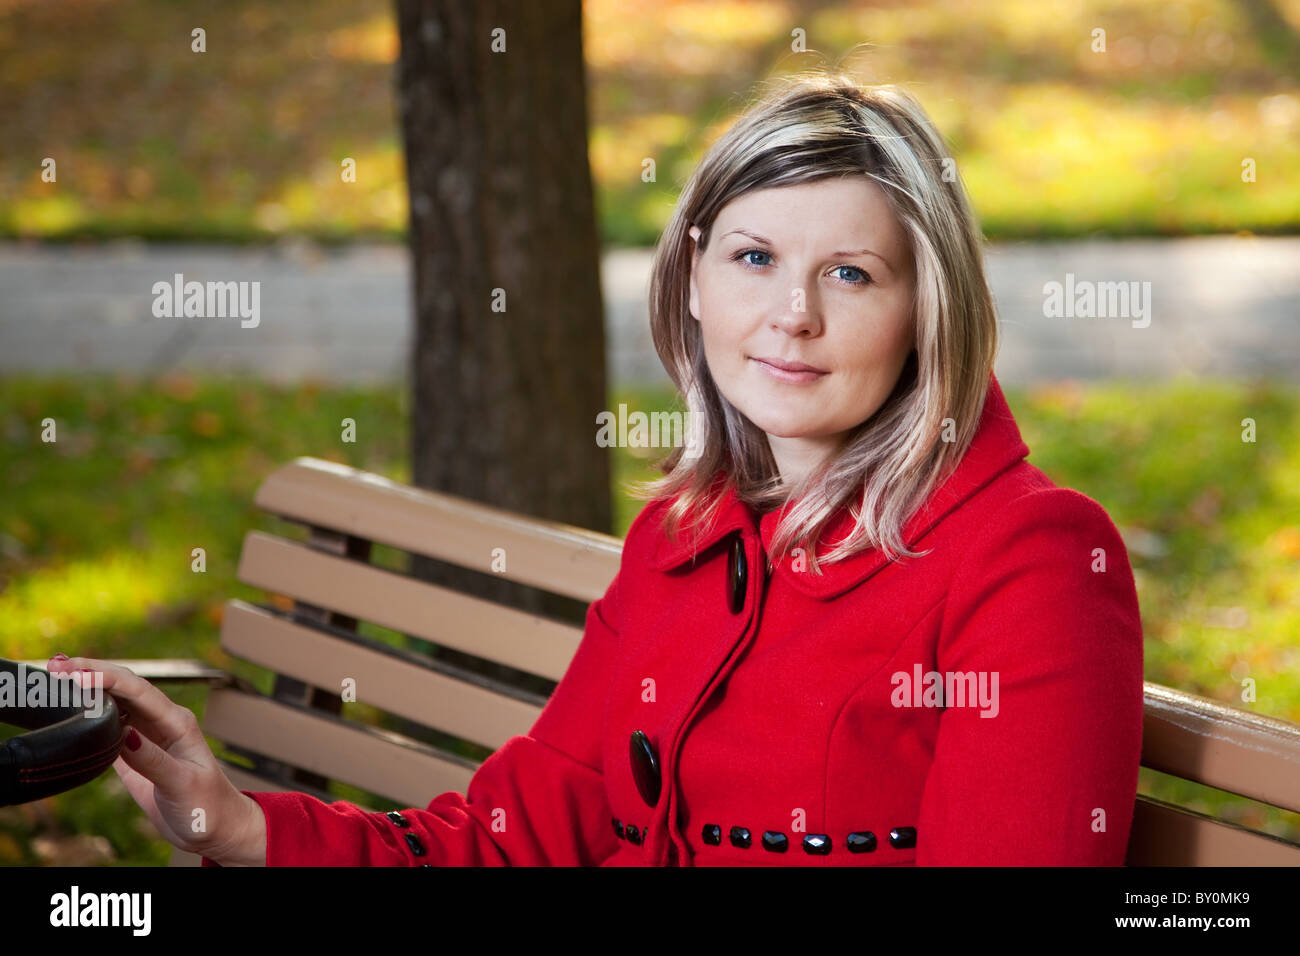 Blond woman in red coat holding handle or pram. Stock Photo